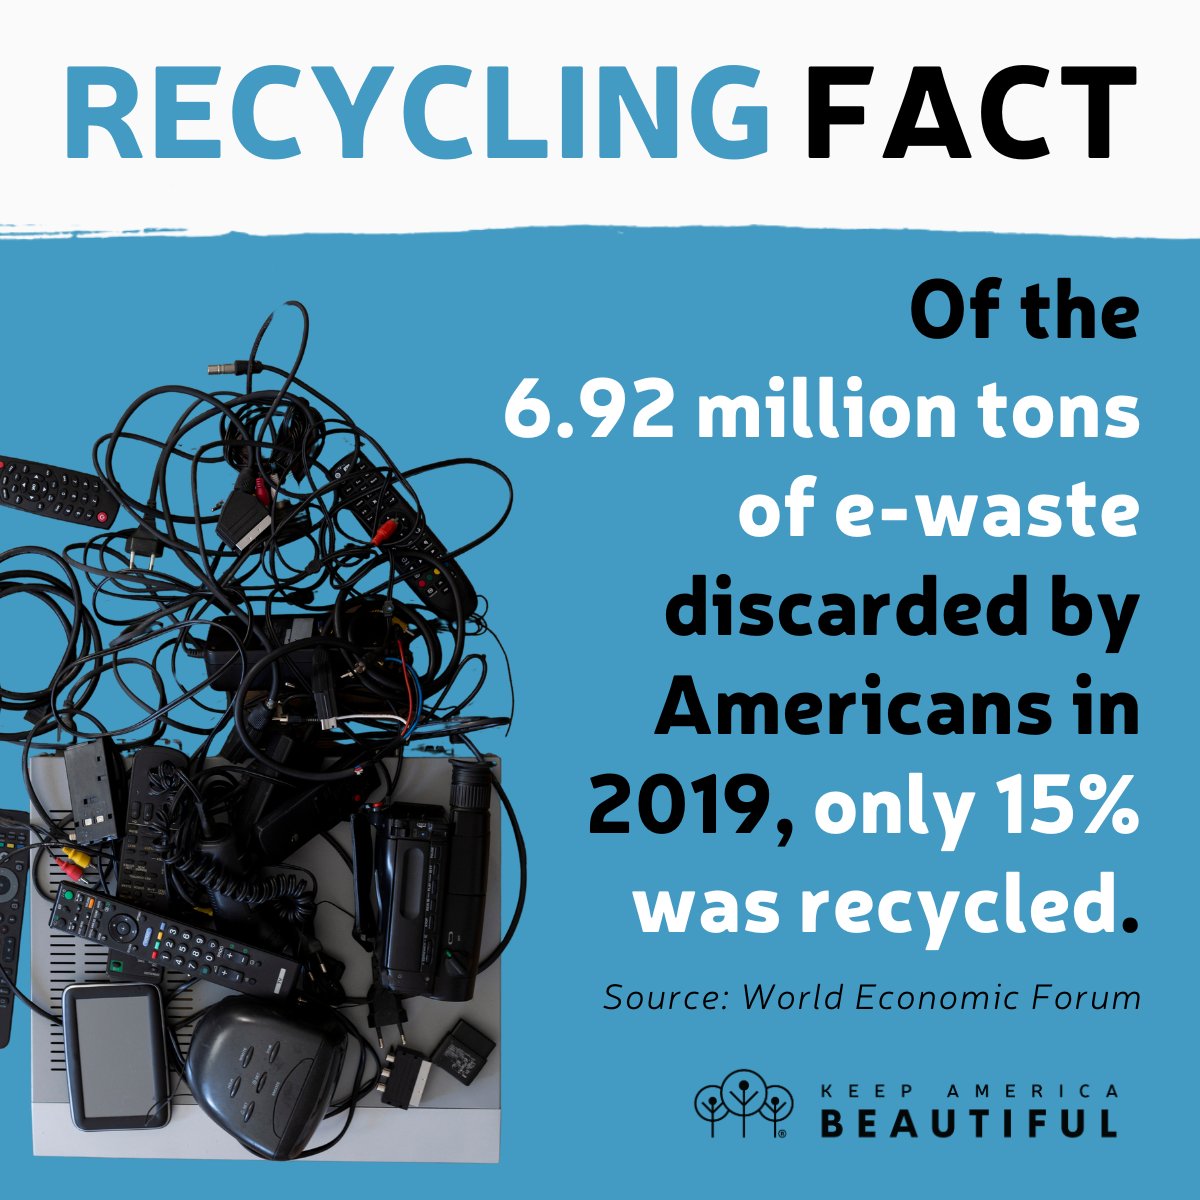 Are you recycling your electronics correctly? Reminder: they can’t be thrown in the waste bin! Learn more about how YOU can recycle right: bit.ly/3Tcr01f #KeepAmericaBeautiful #GreatAmericanCleanup #RecyclingRealityCheck